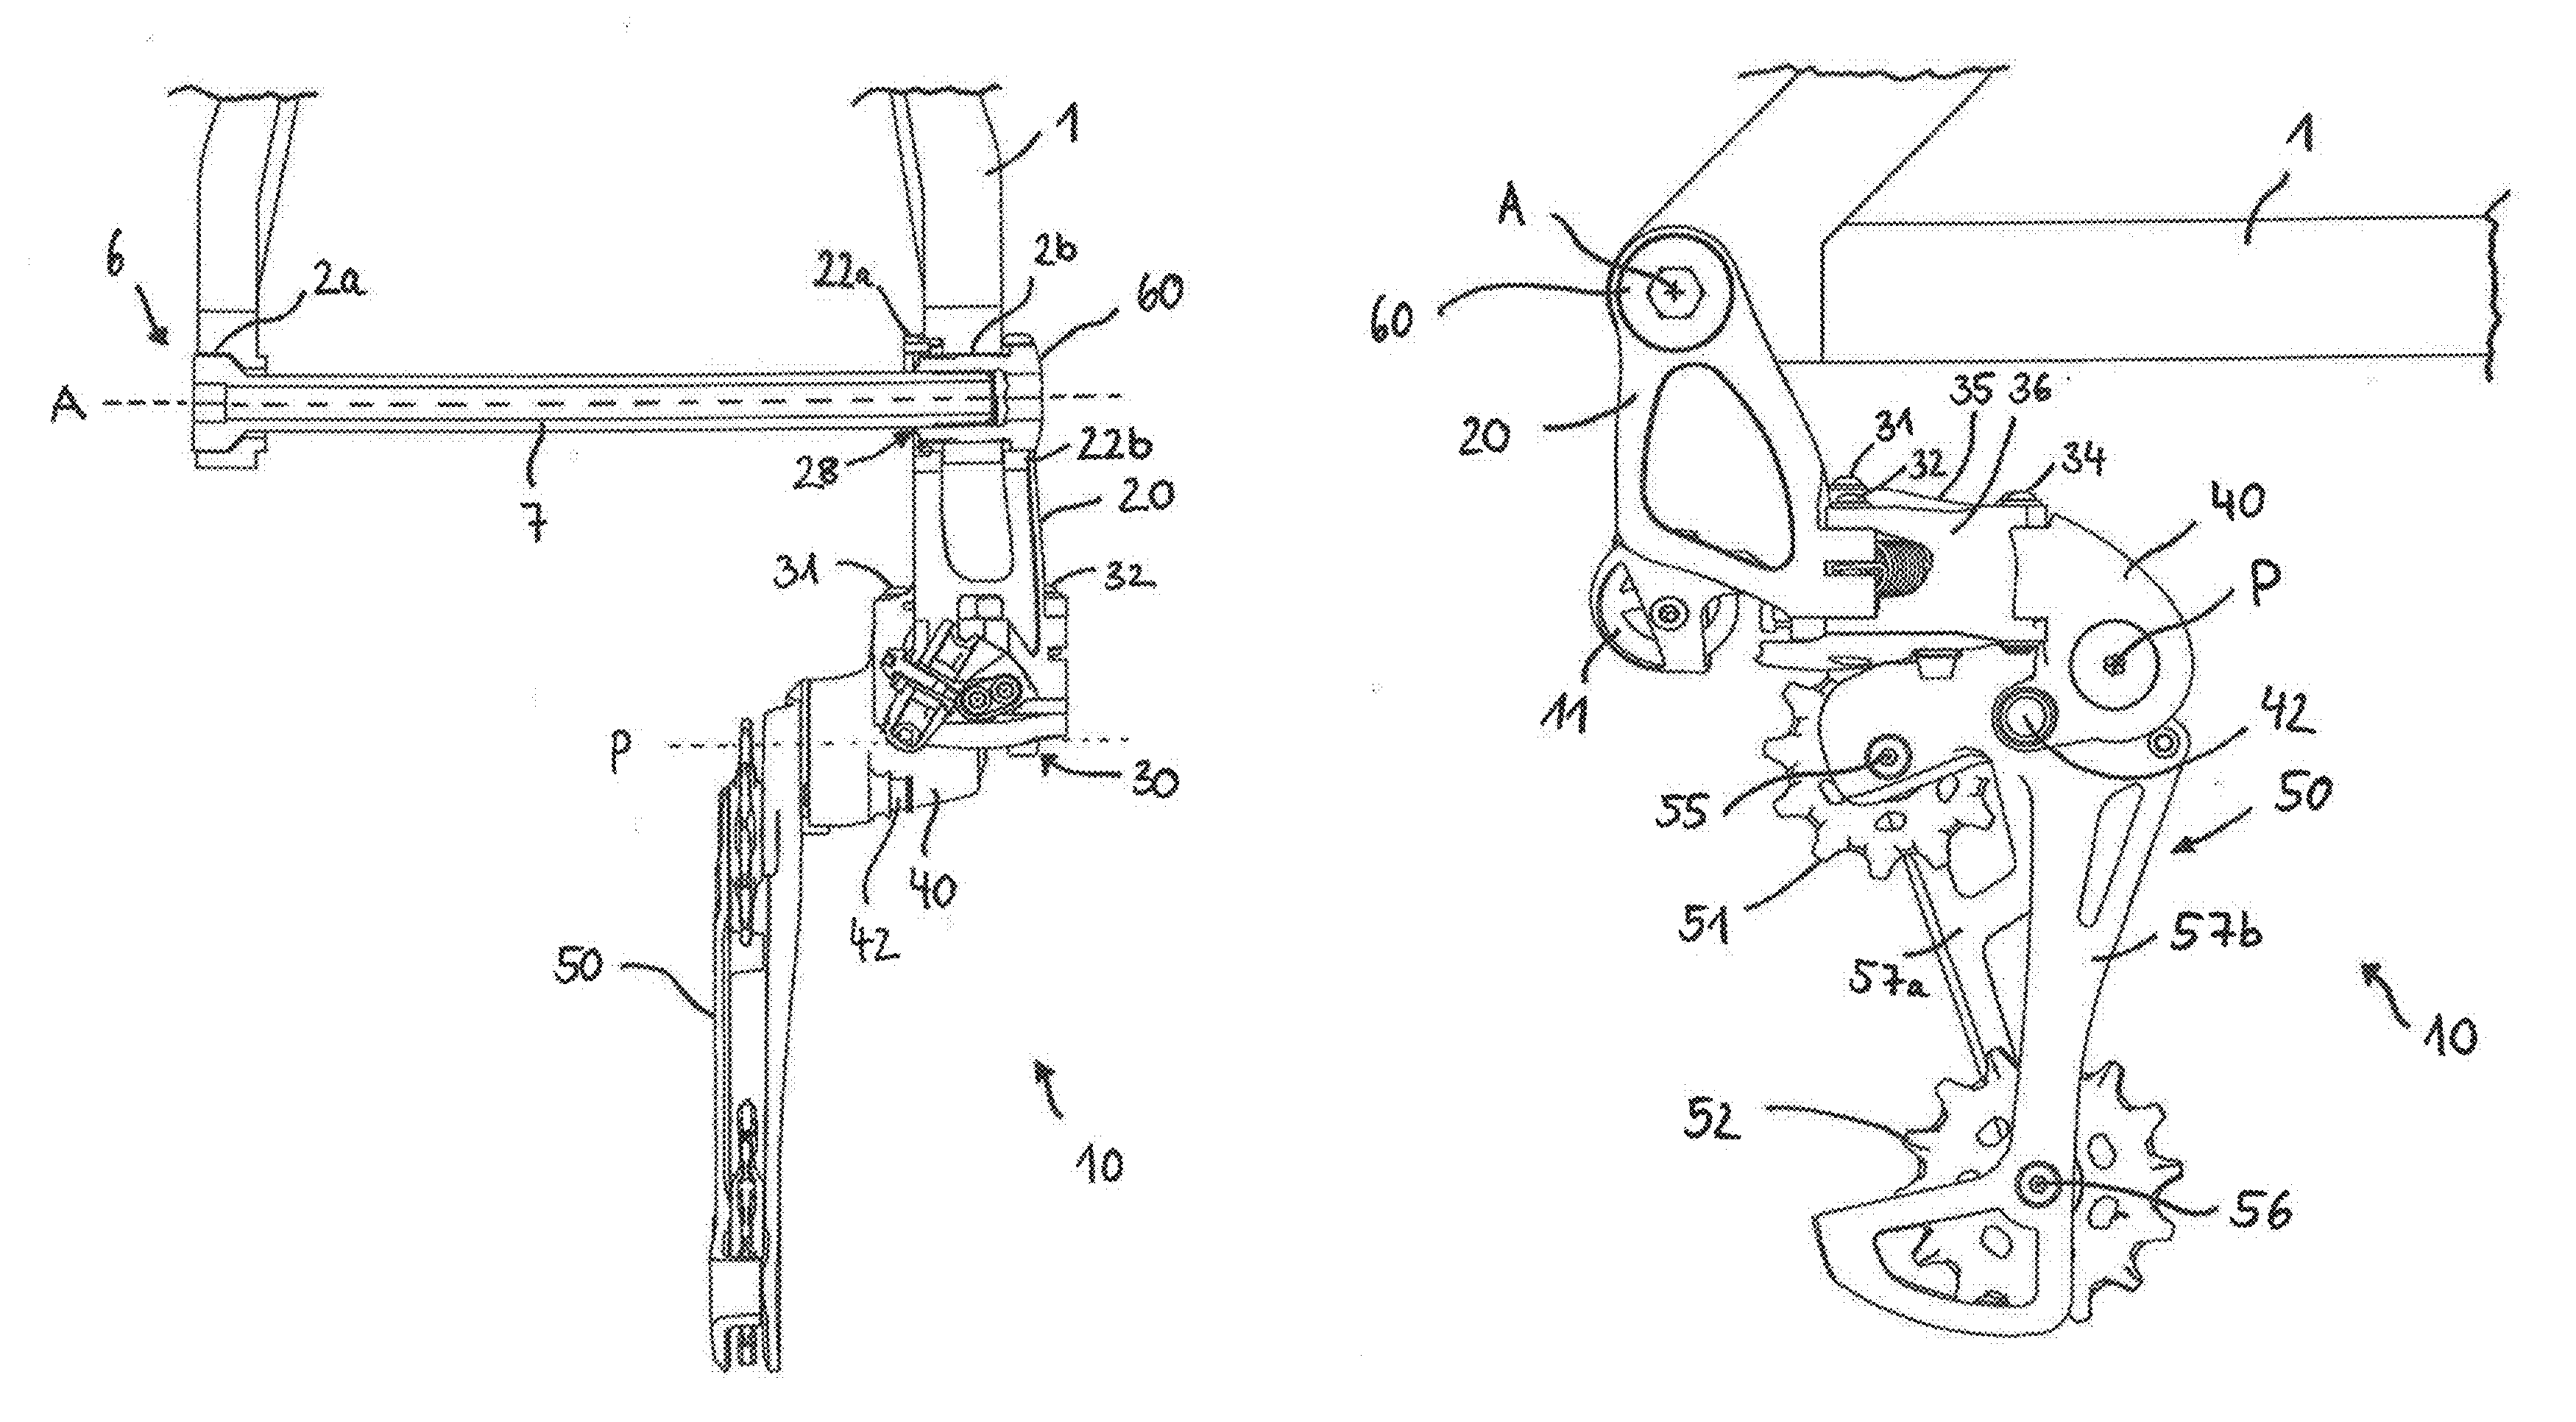 sram patent for direct mount rear derailleur that attaches to the thru axle dropout